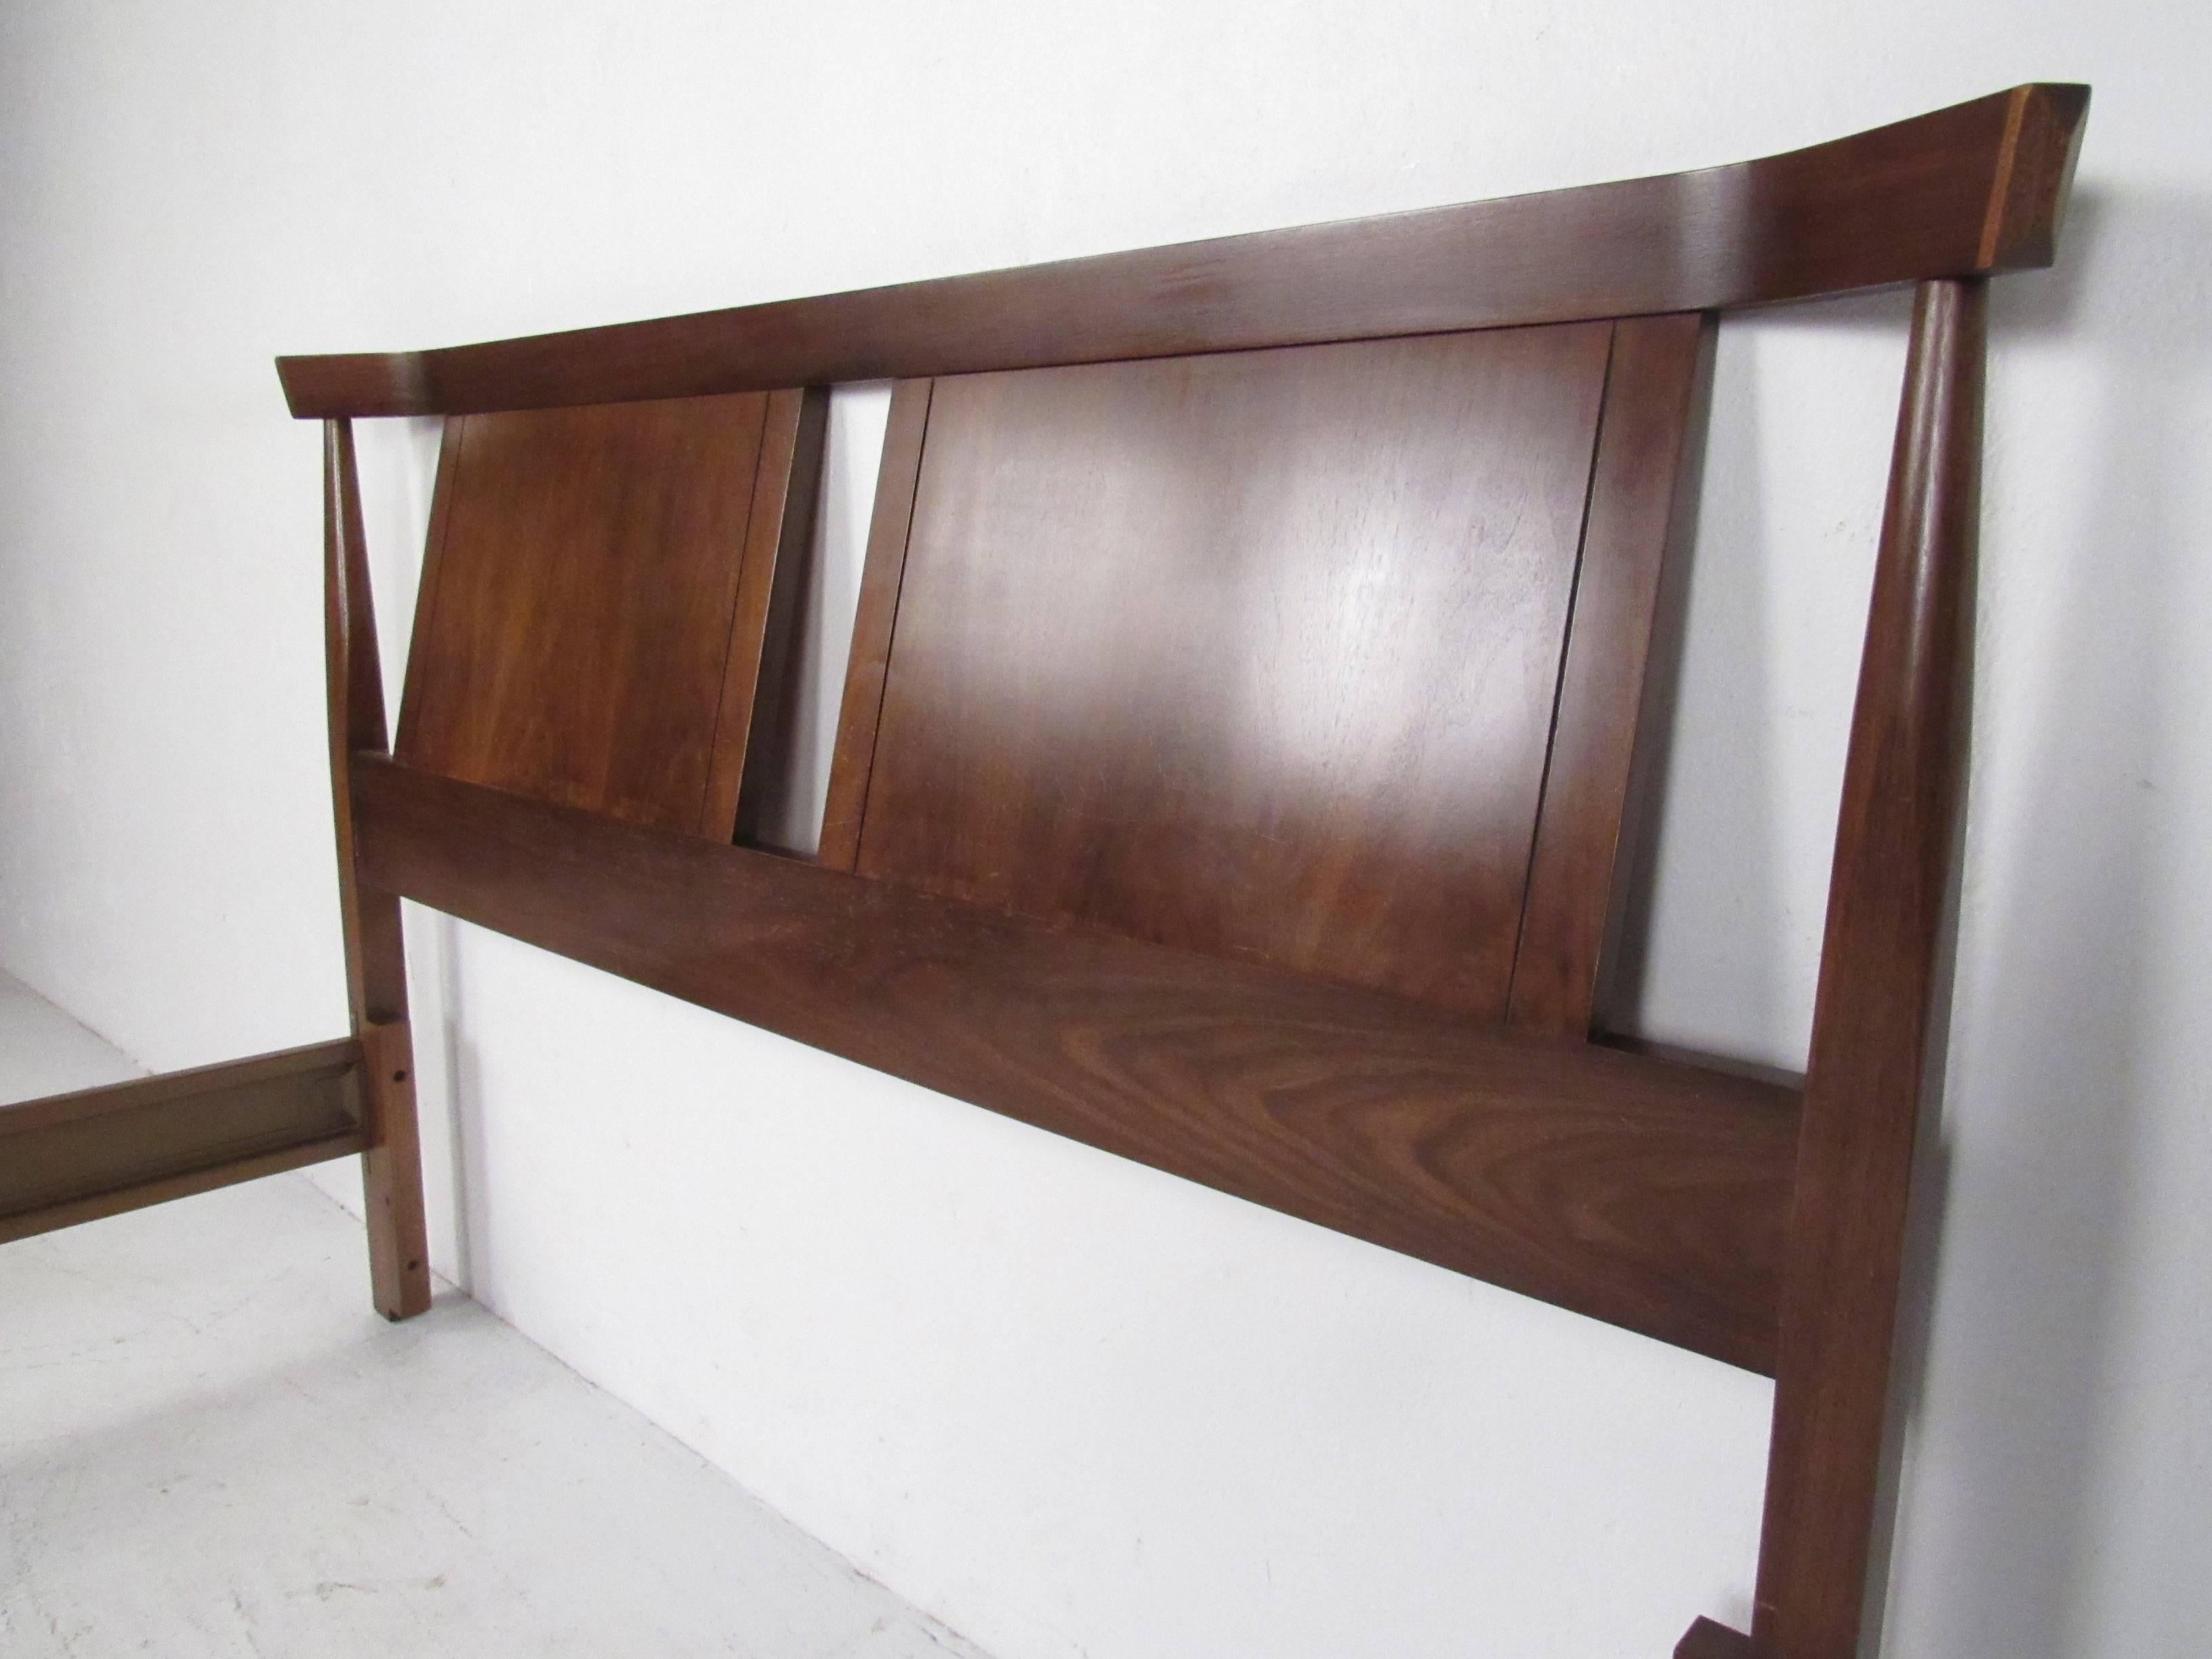 Full size bed frame with walnut headboard and footboard and metal side rails. (Footboard measures 57